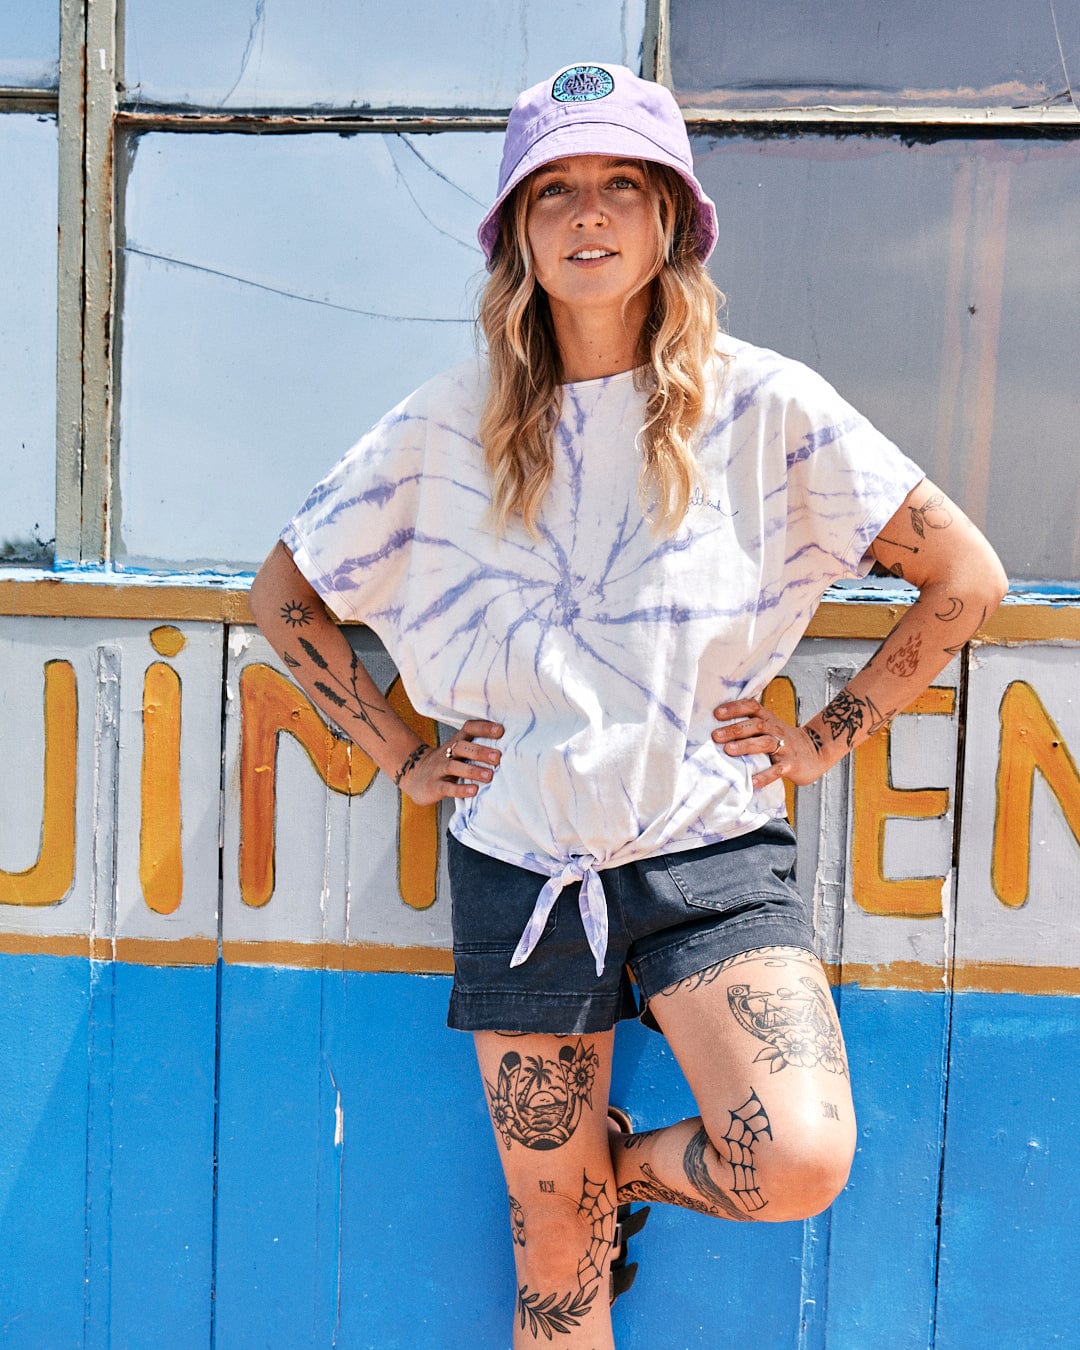 Woman in Saltrock Swirl - Womens Short Sleeve T-Shirt - Tie Dye White/Purple and denim shorts standing in front of a colorful, graffiti-covered wall.